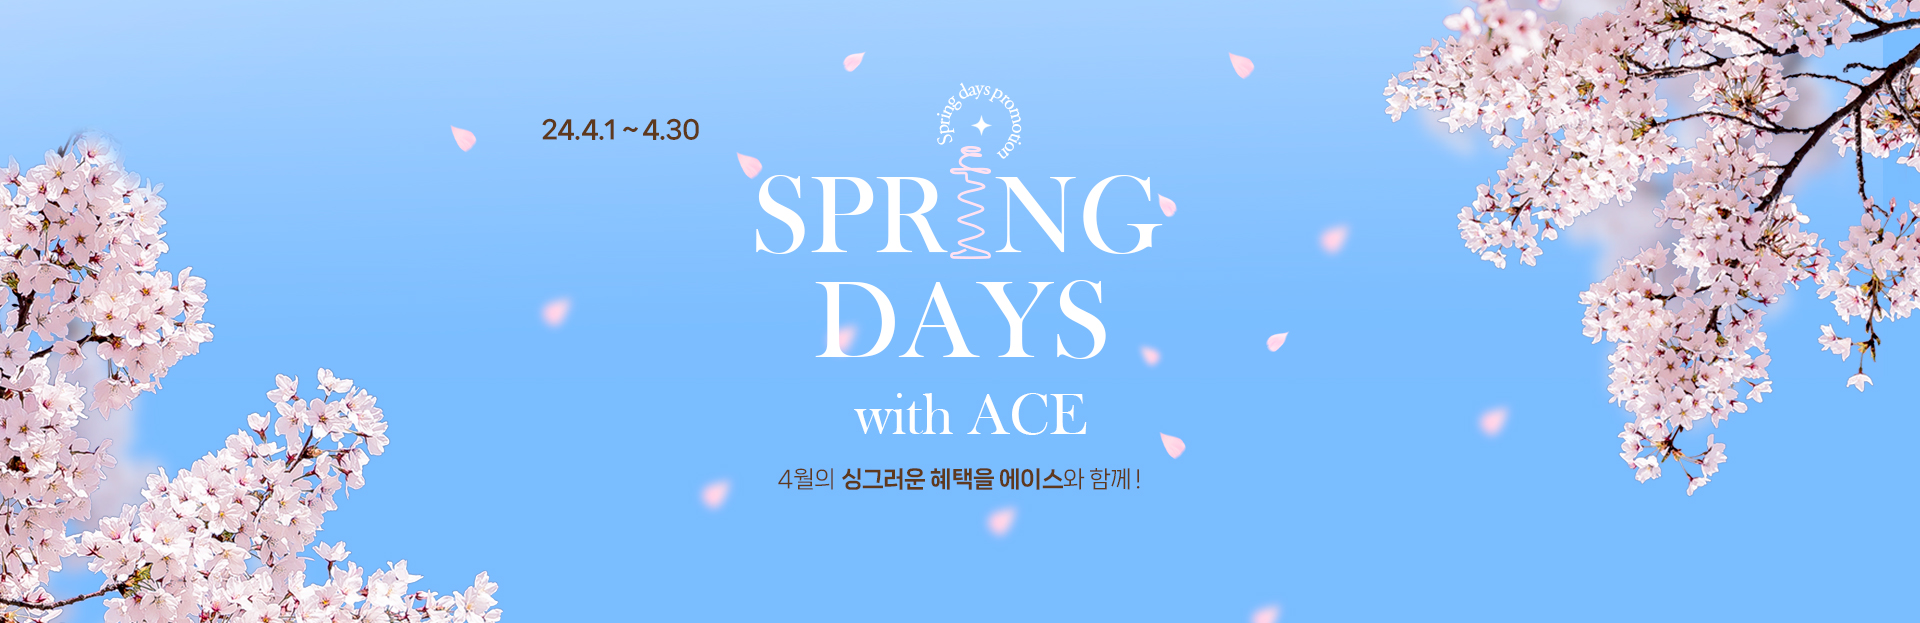 SPRING DAYS with ACE